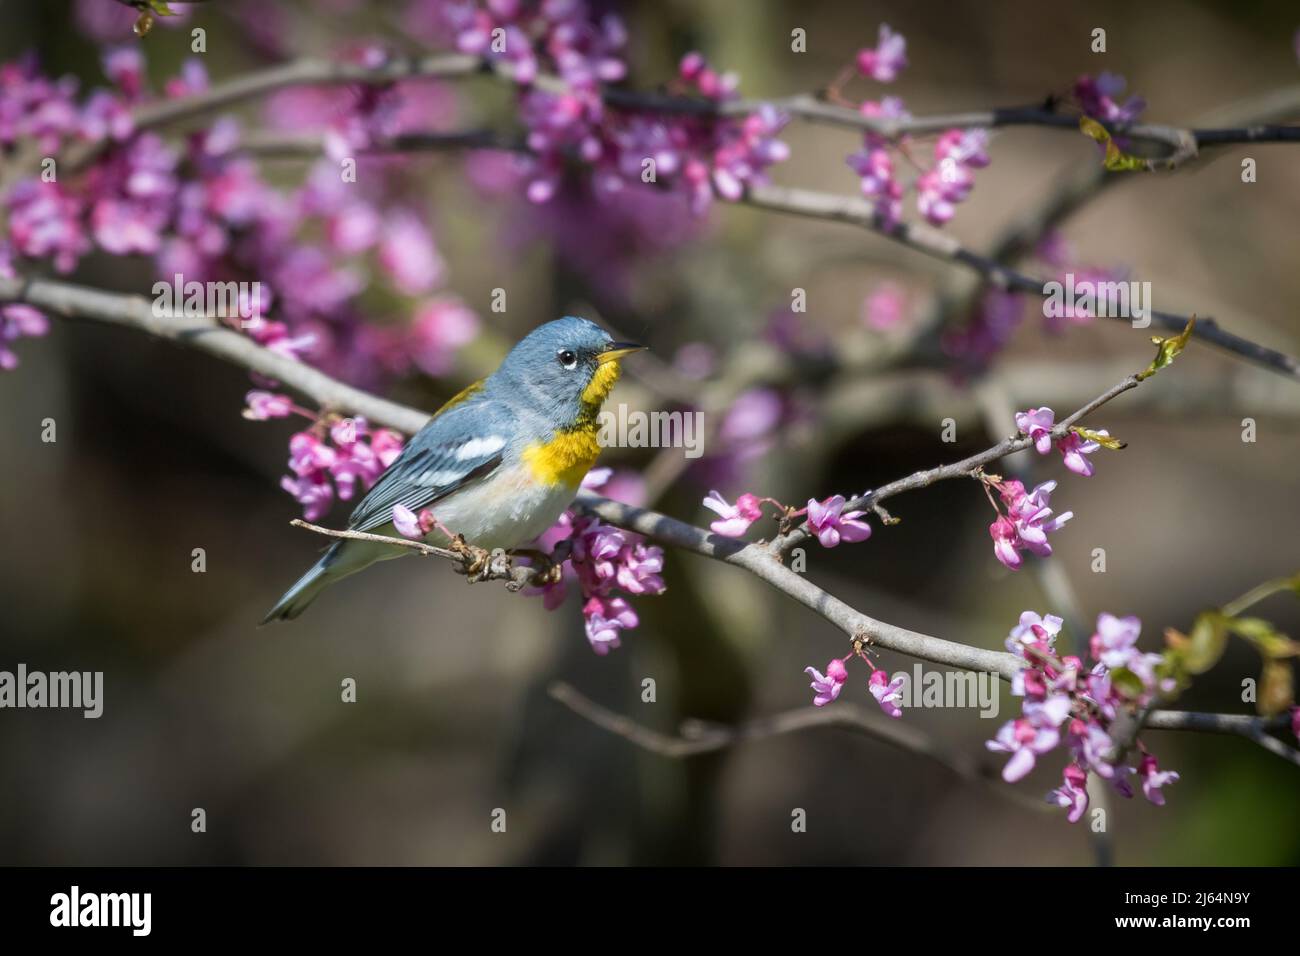 Male Northern Parula sitting on the branch of an Eastern Redbud tree surrounded by flowers. Stock Photo